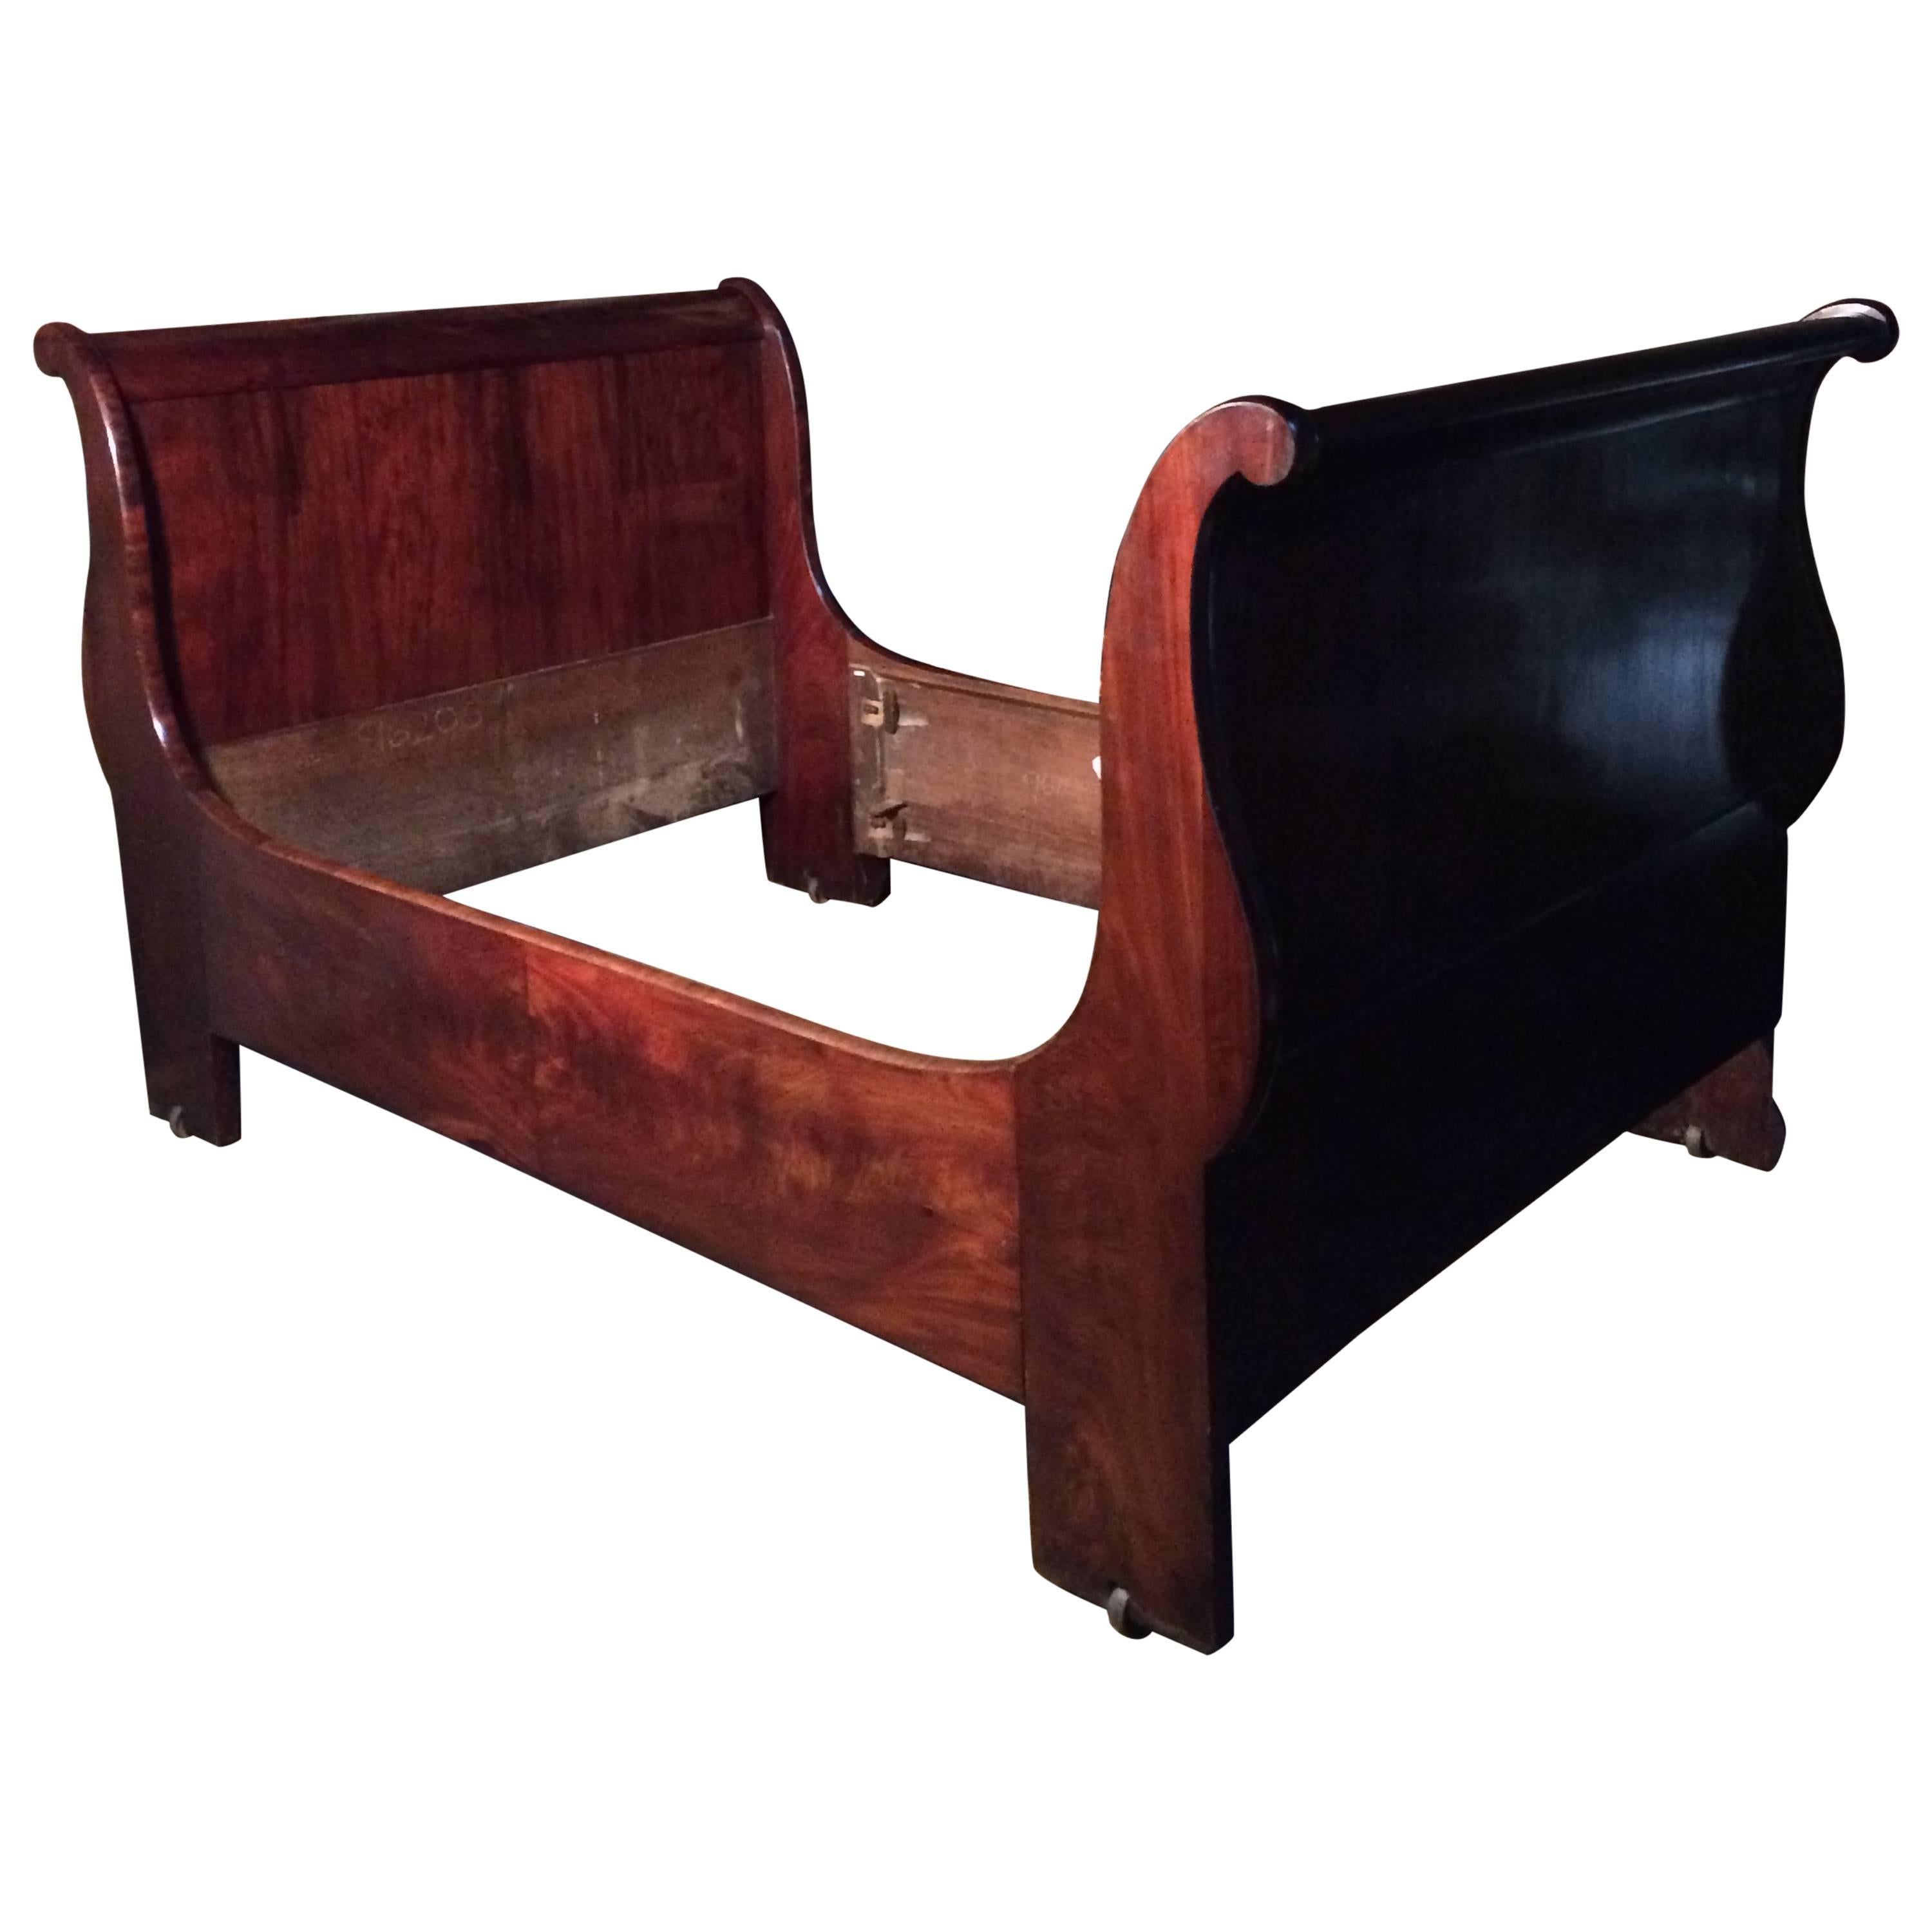 Gorgeous Antique Empire Mahogany Sleigh Bed